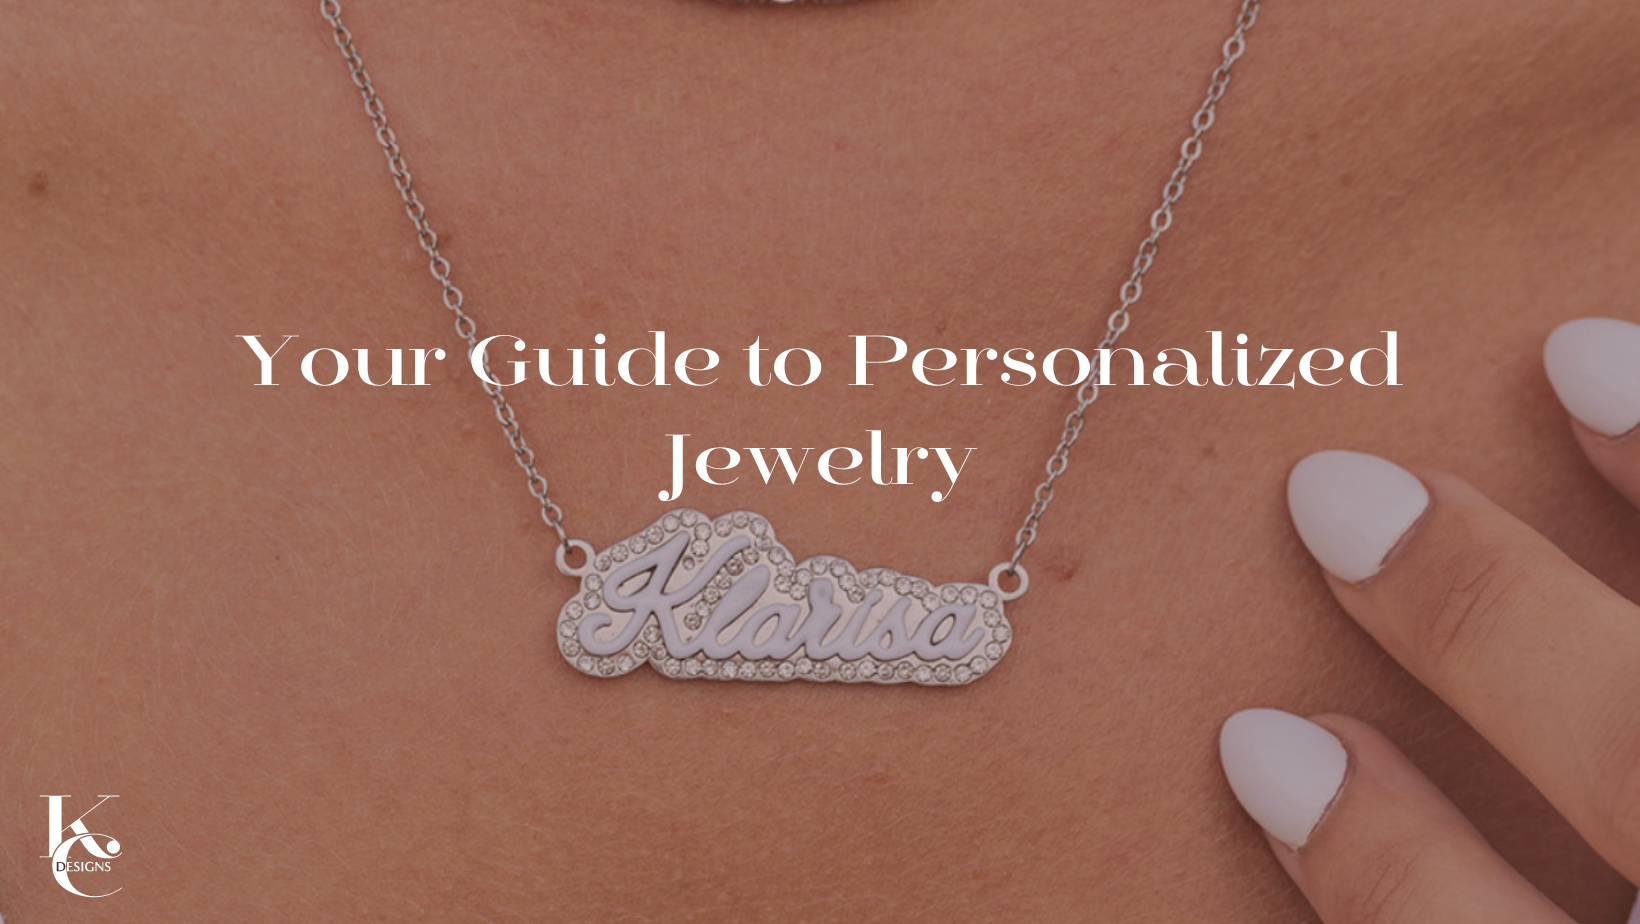 Your Guide to Personalized Jewelry